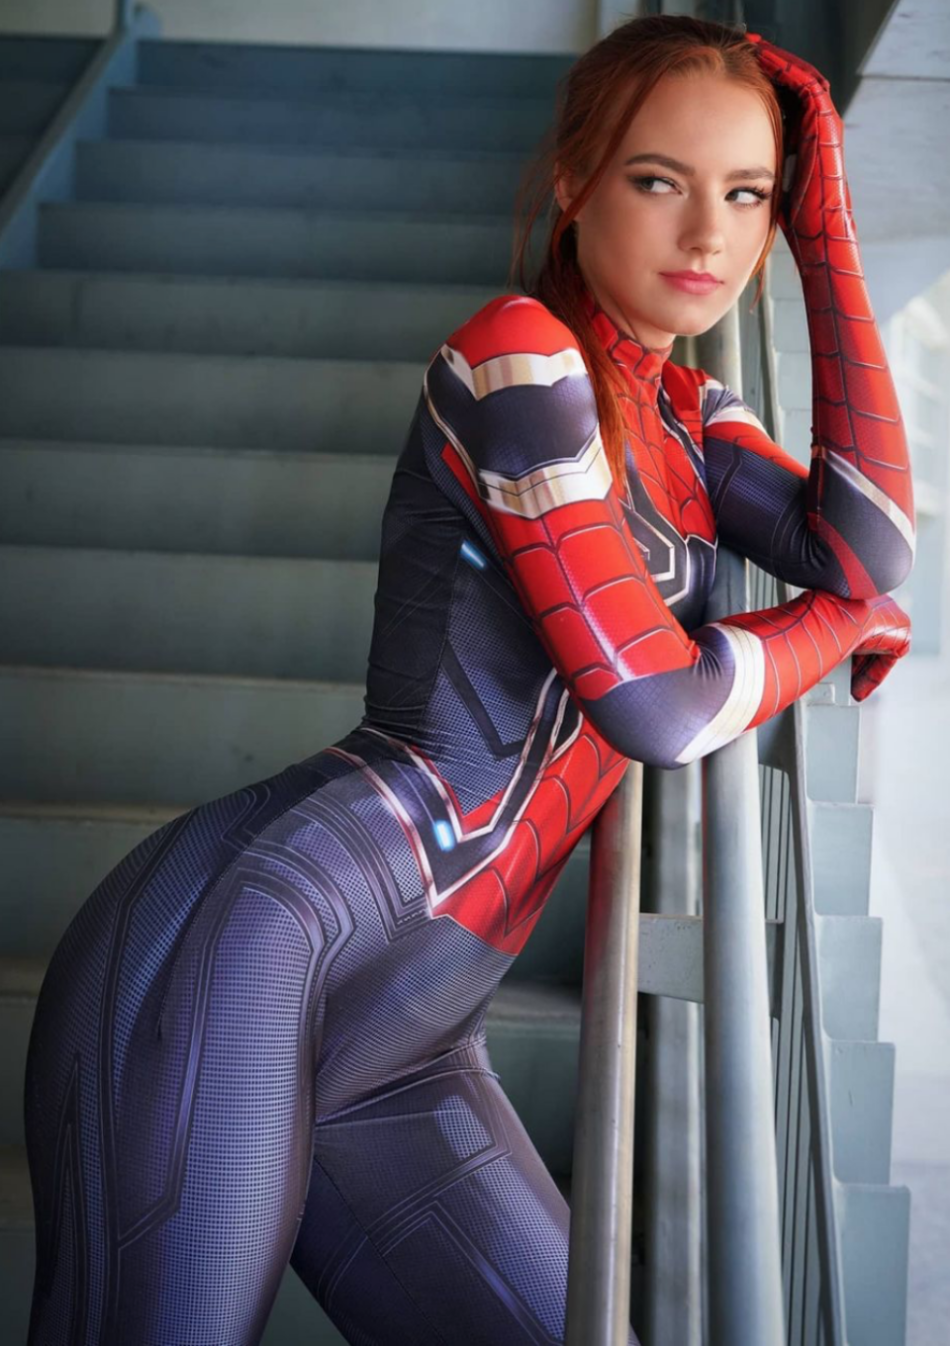 Sexy Red Hot Cosplay Girls Spiderman Women Best Photo Compilation 2021 (89 HQ Photos) 518